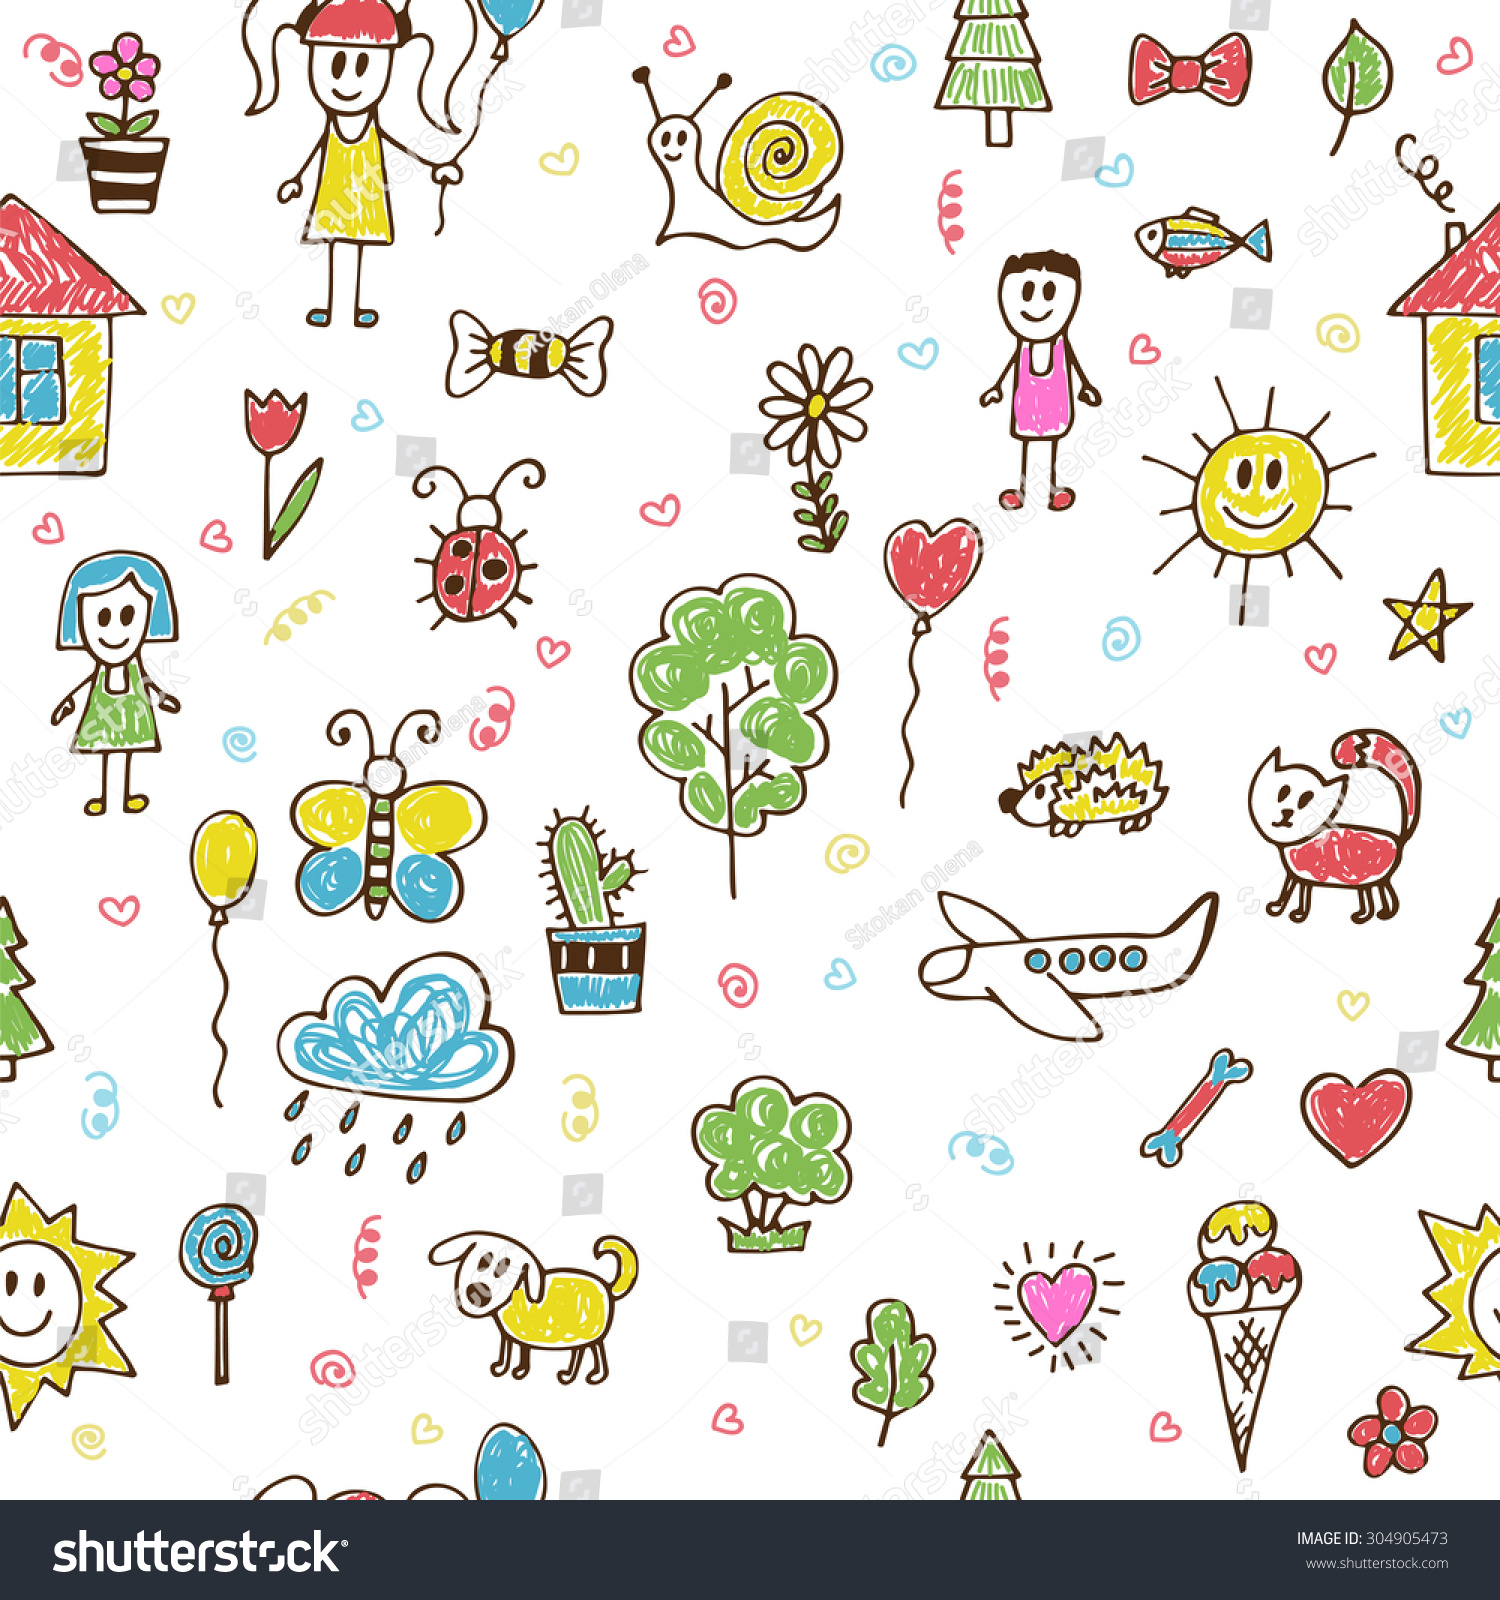 Hand Drawn Children Drawings Color Seamless Pattern. Doodle Children ...